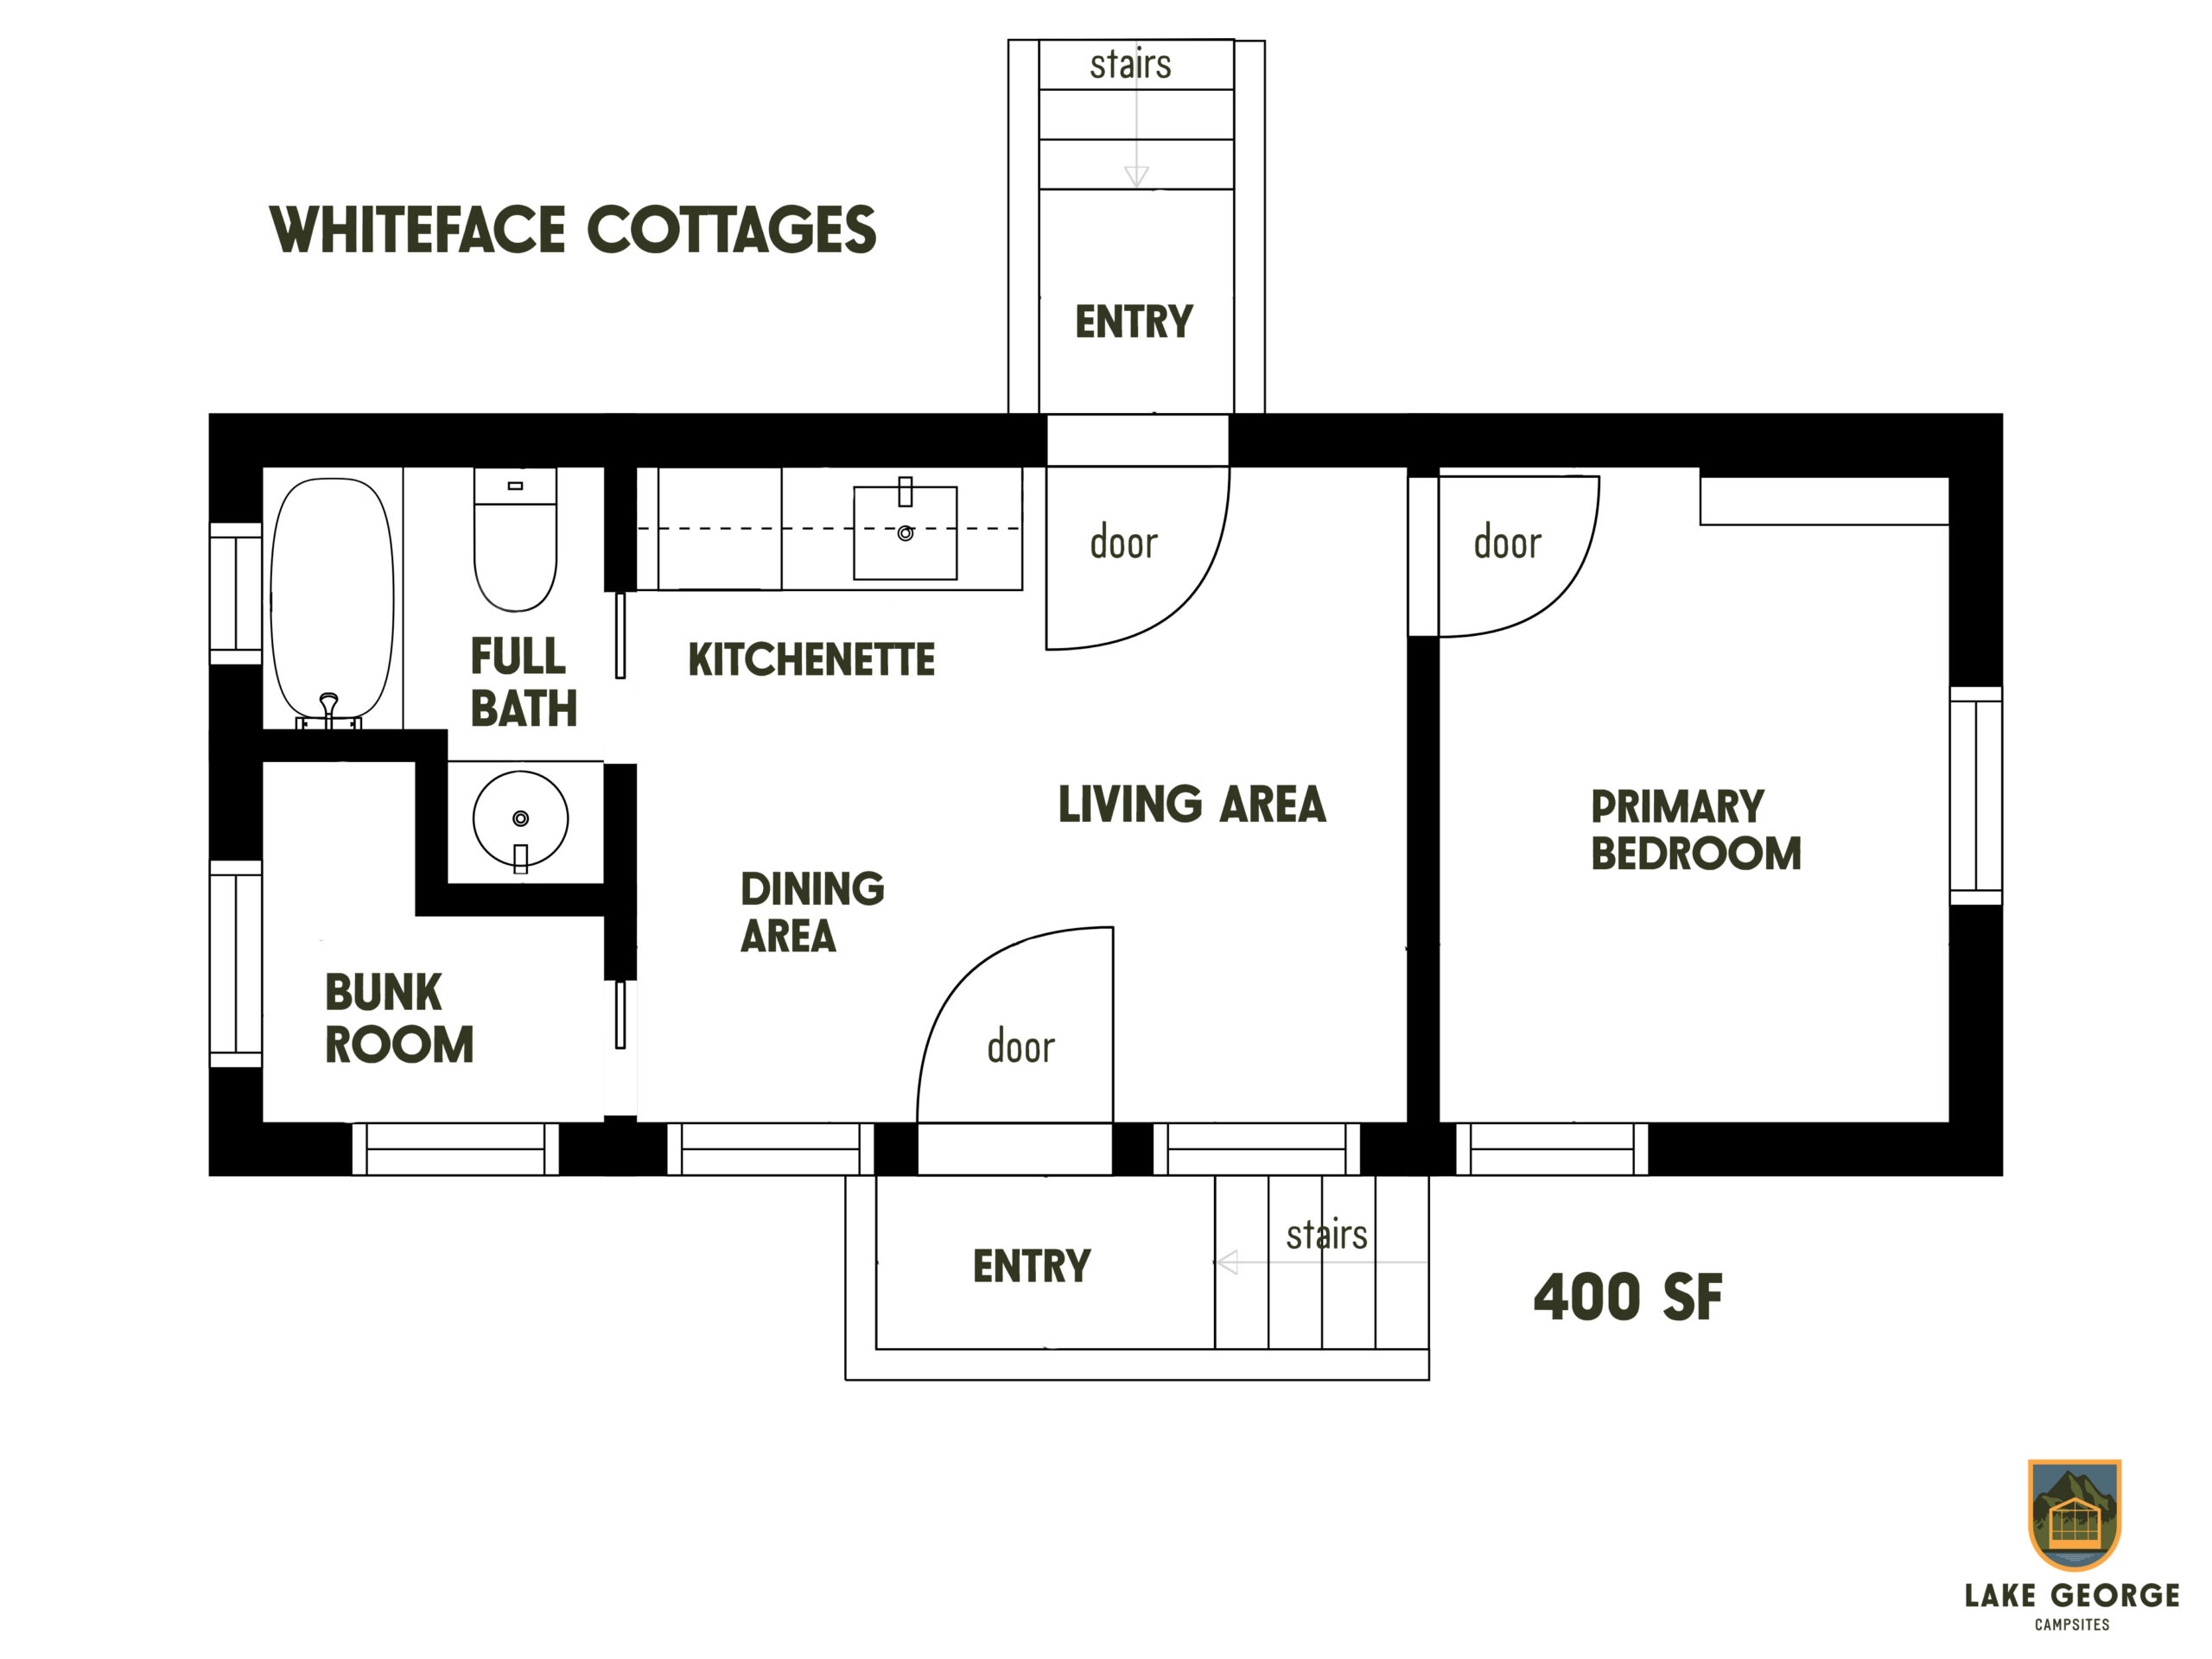 Whiteface-cottages-floor-plan